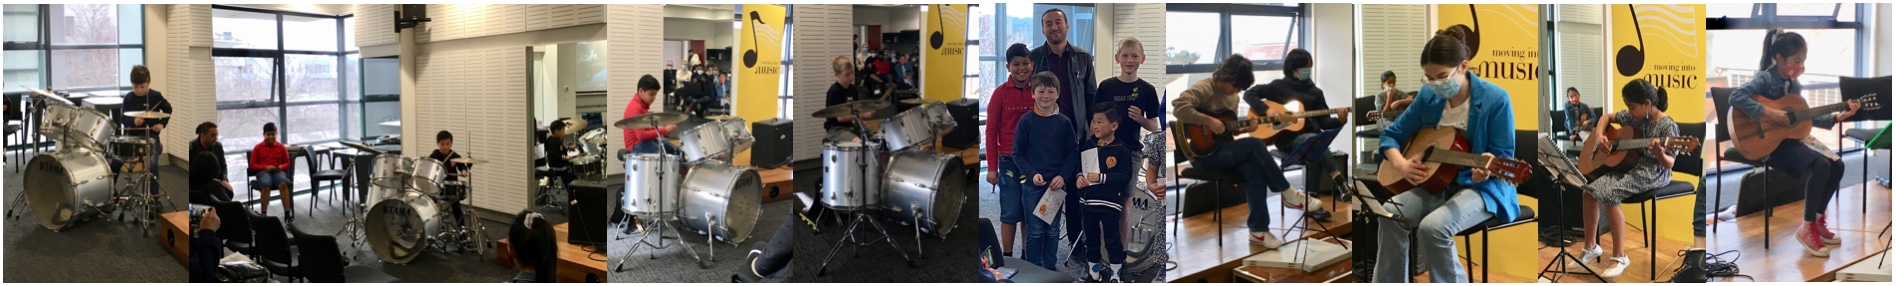 Moving Into Music Mid-Year Concert 2 – Guitars  and Drums